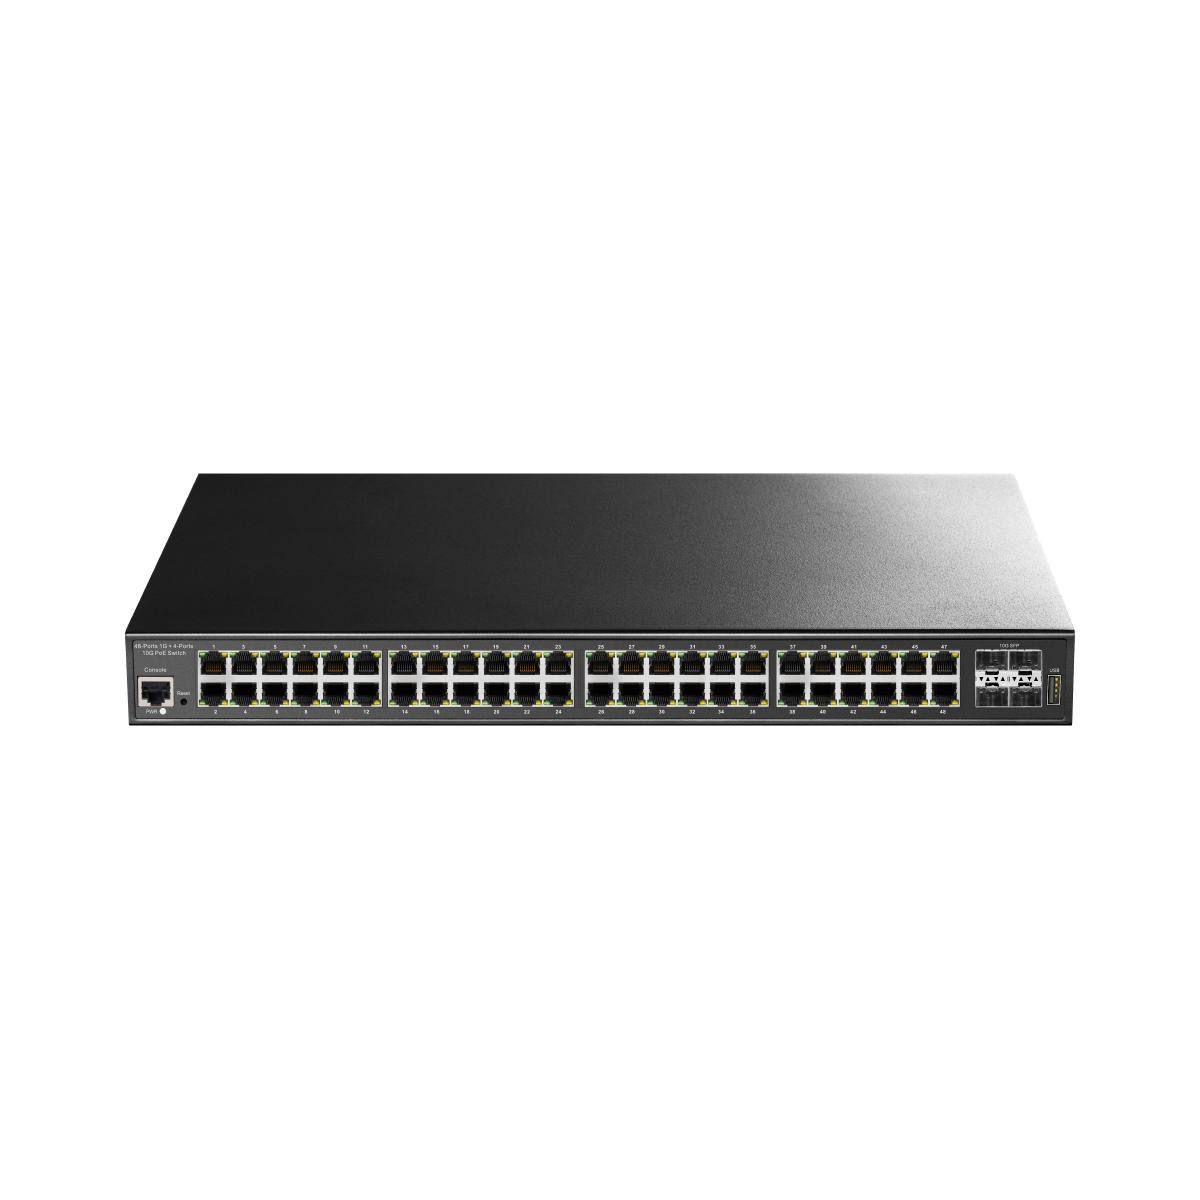 Cudy 48-Port L2 Managed Gigabit PoE++ Switch with 4 10G SFP slots (GS2048PS4-720W)